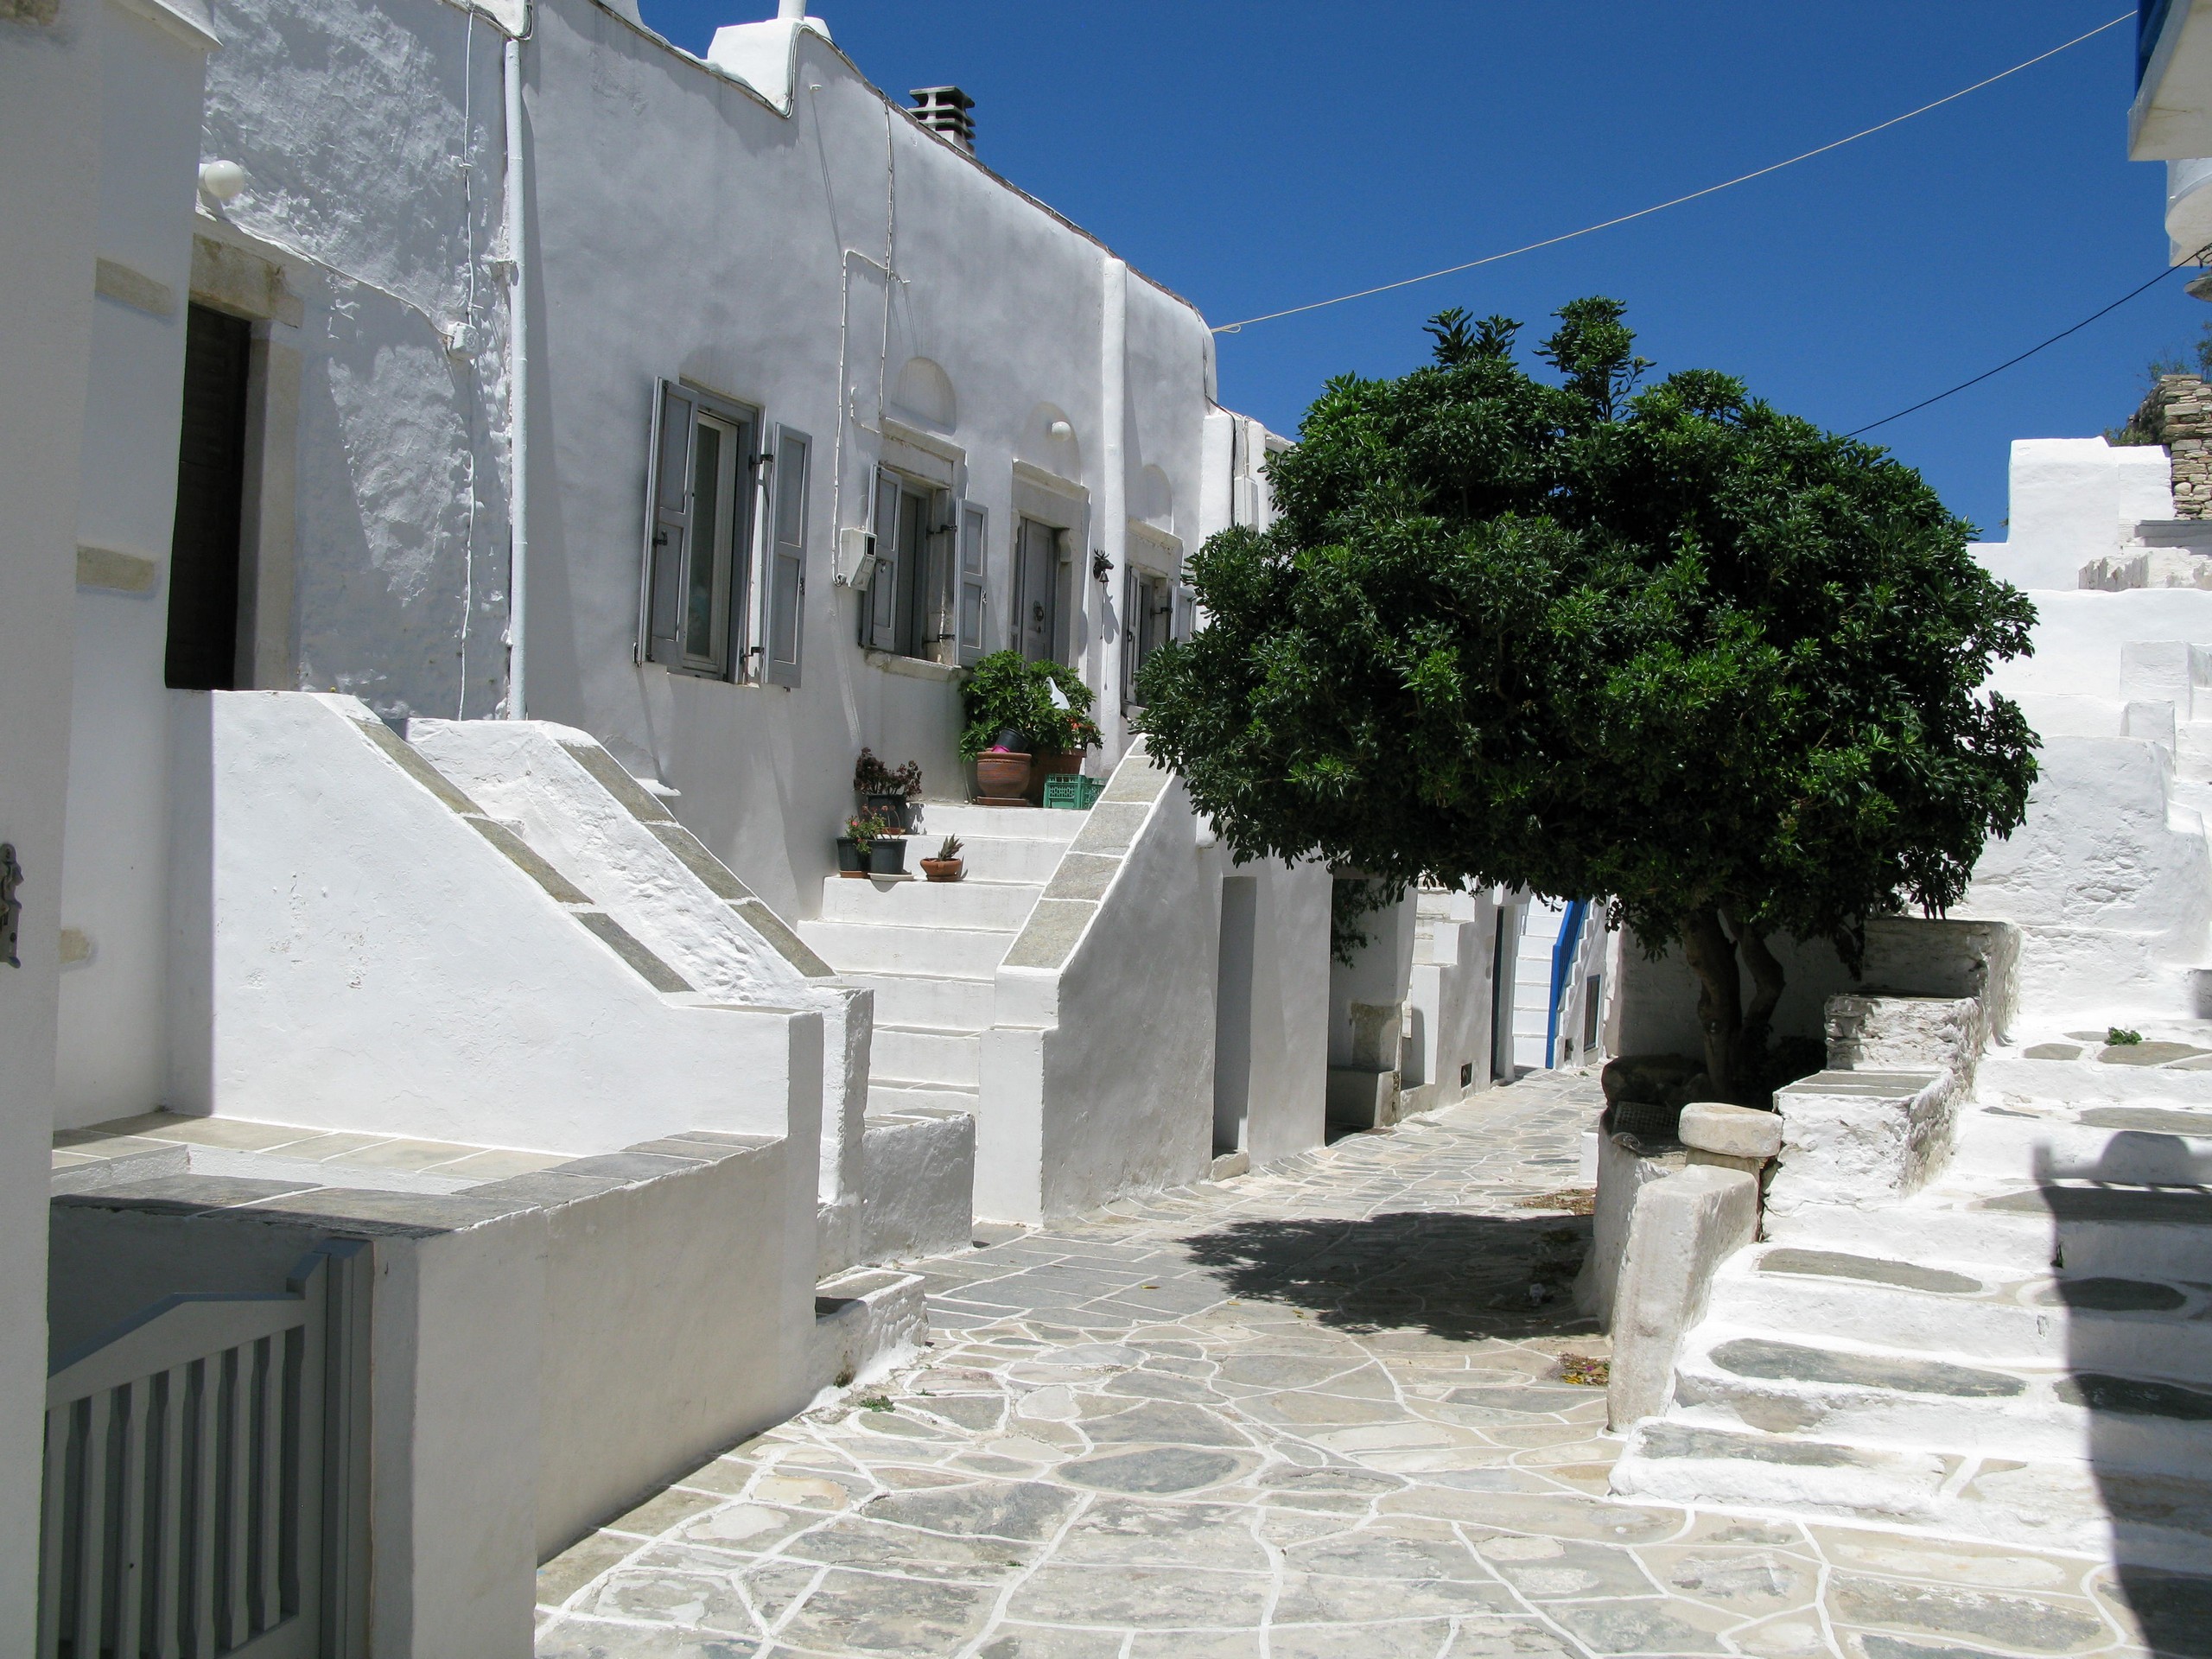 Alley in Kastro, Sifnos